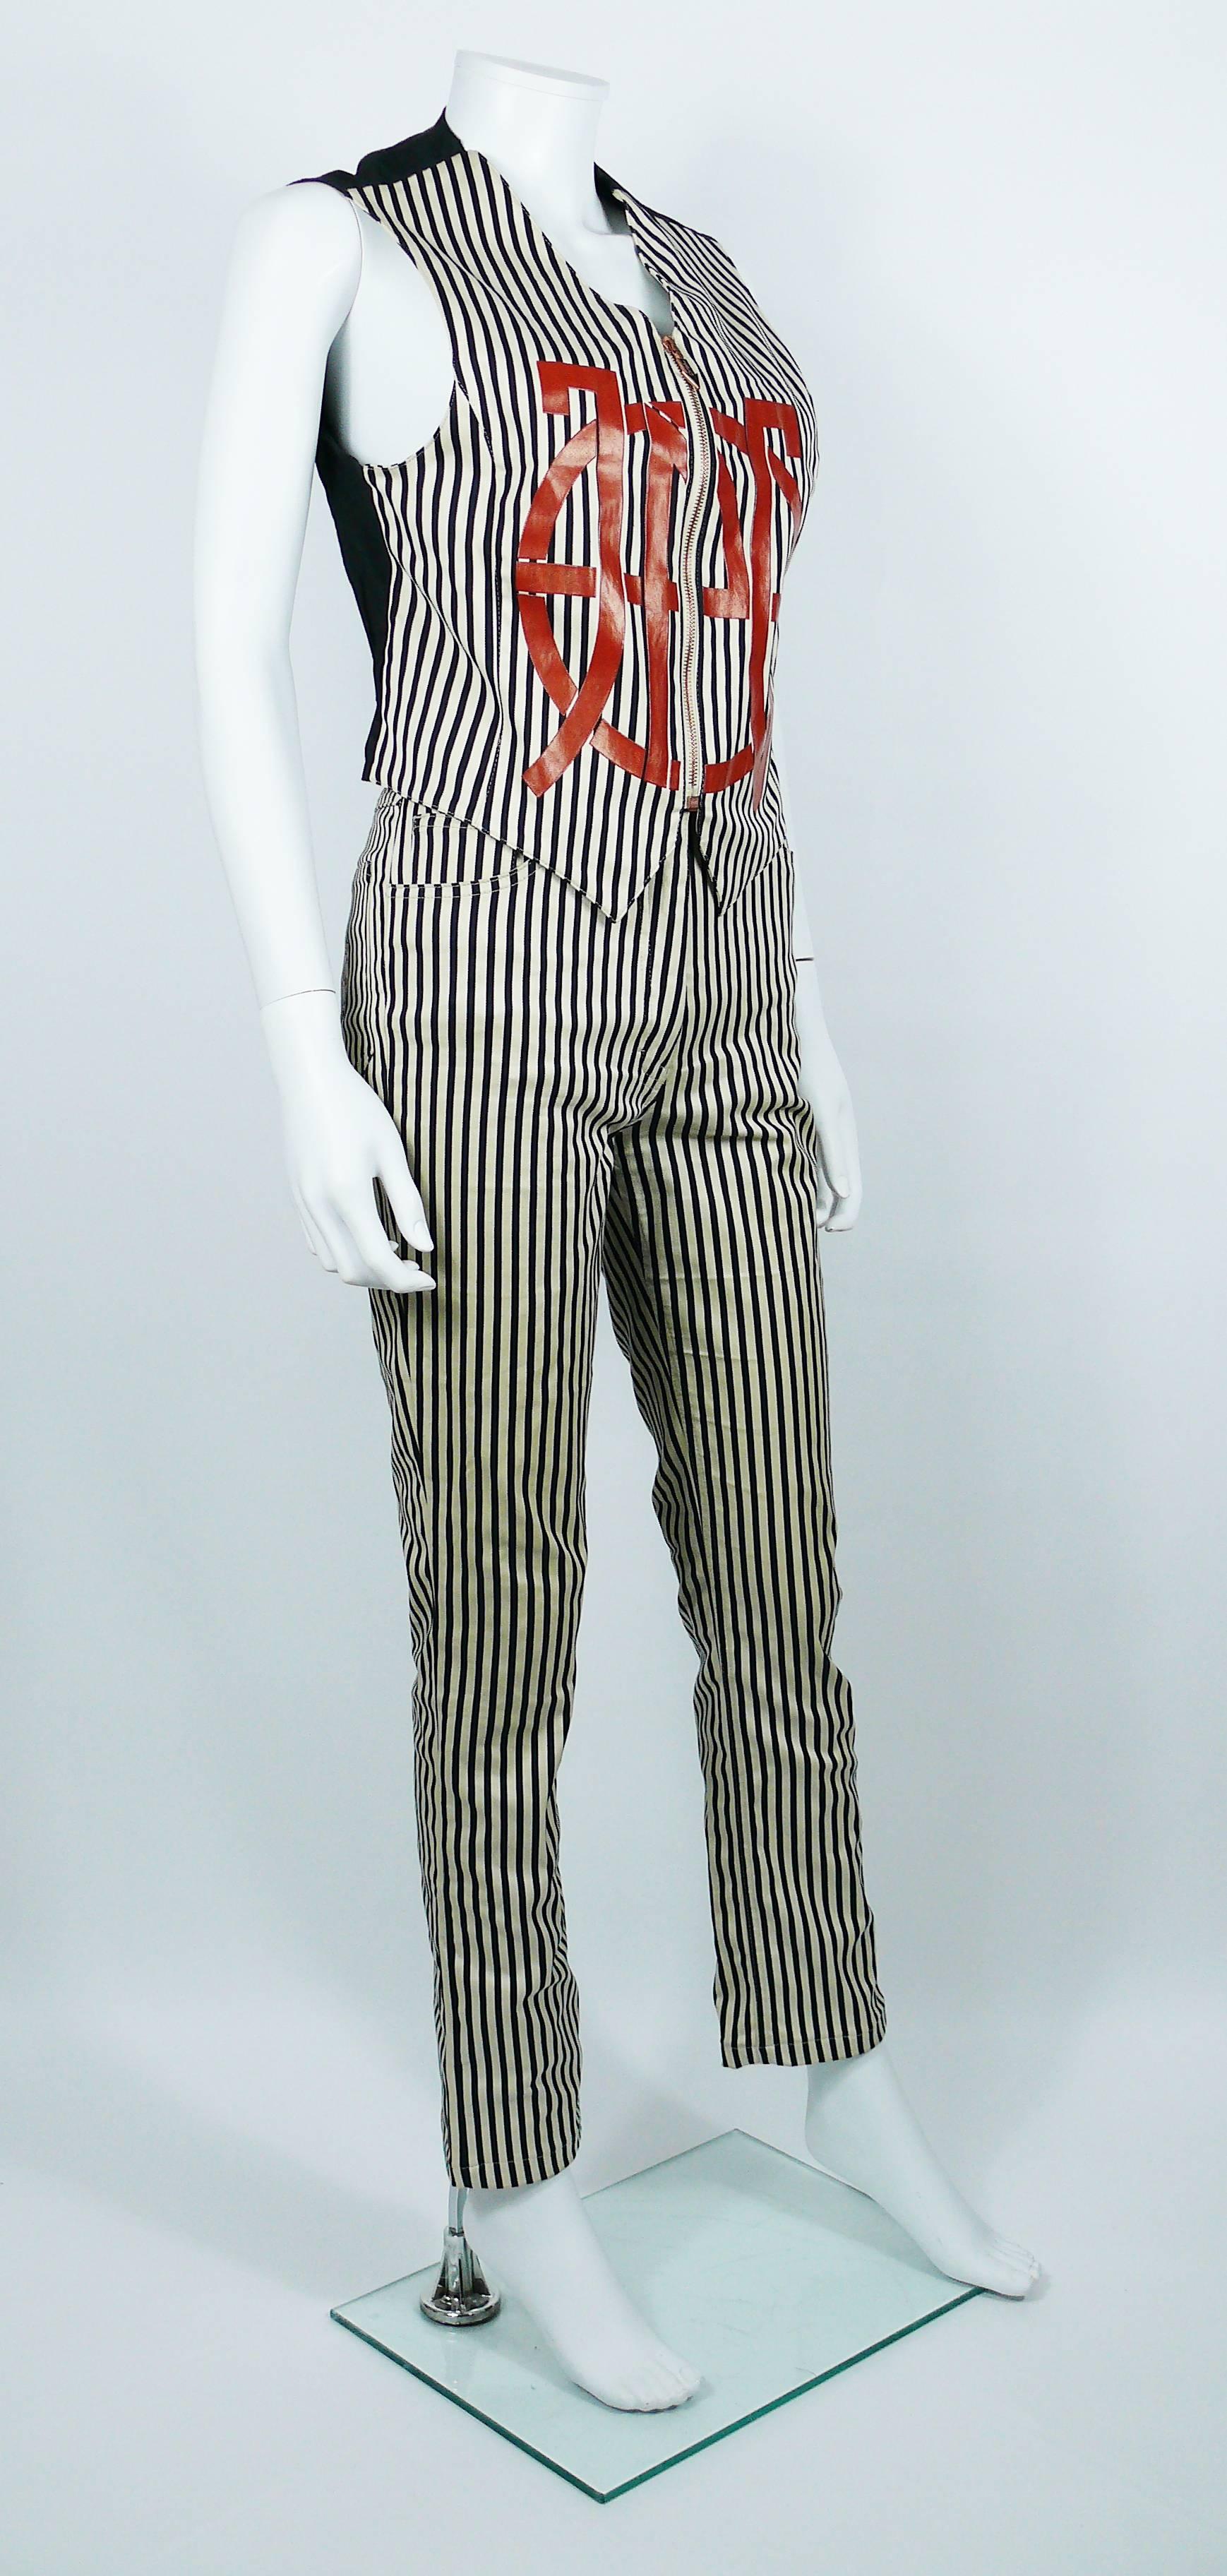 JEAN PAUL GAULTIER vintage 1990s vest and trouser set featuring a black striped design with a large red flocked JPG logo on the vest front.

VEST features :
- Front zippered closure with enameled JPG signature holder.
- Large red flocked JPG logo on